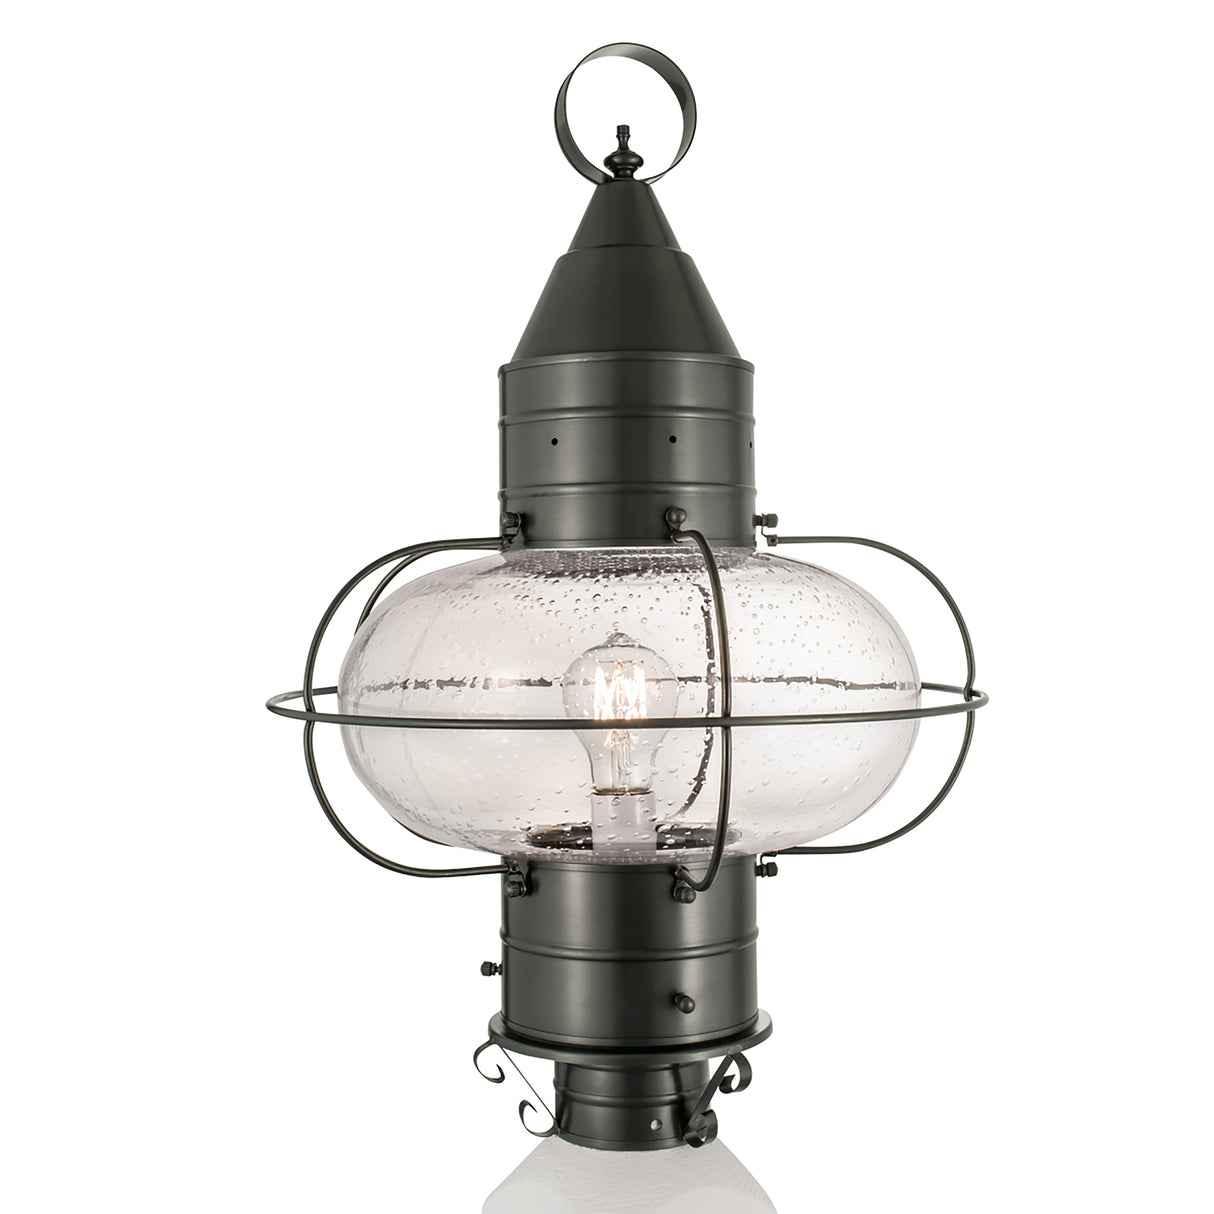 Elk 1510-GM-SE Classic Onion Outdoor Post Light - Gun Metal with Seeded Glass